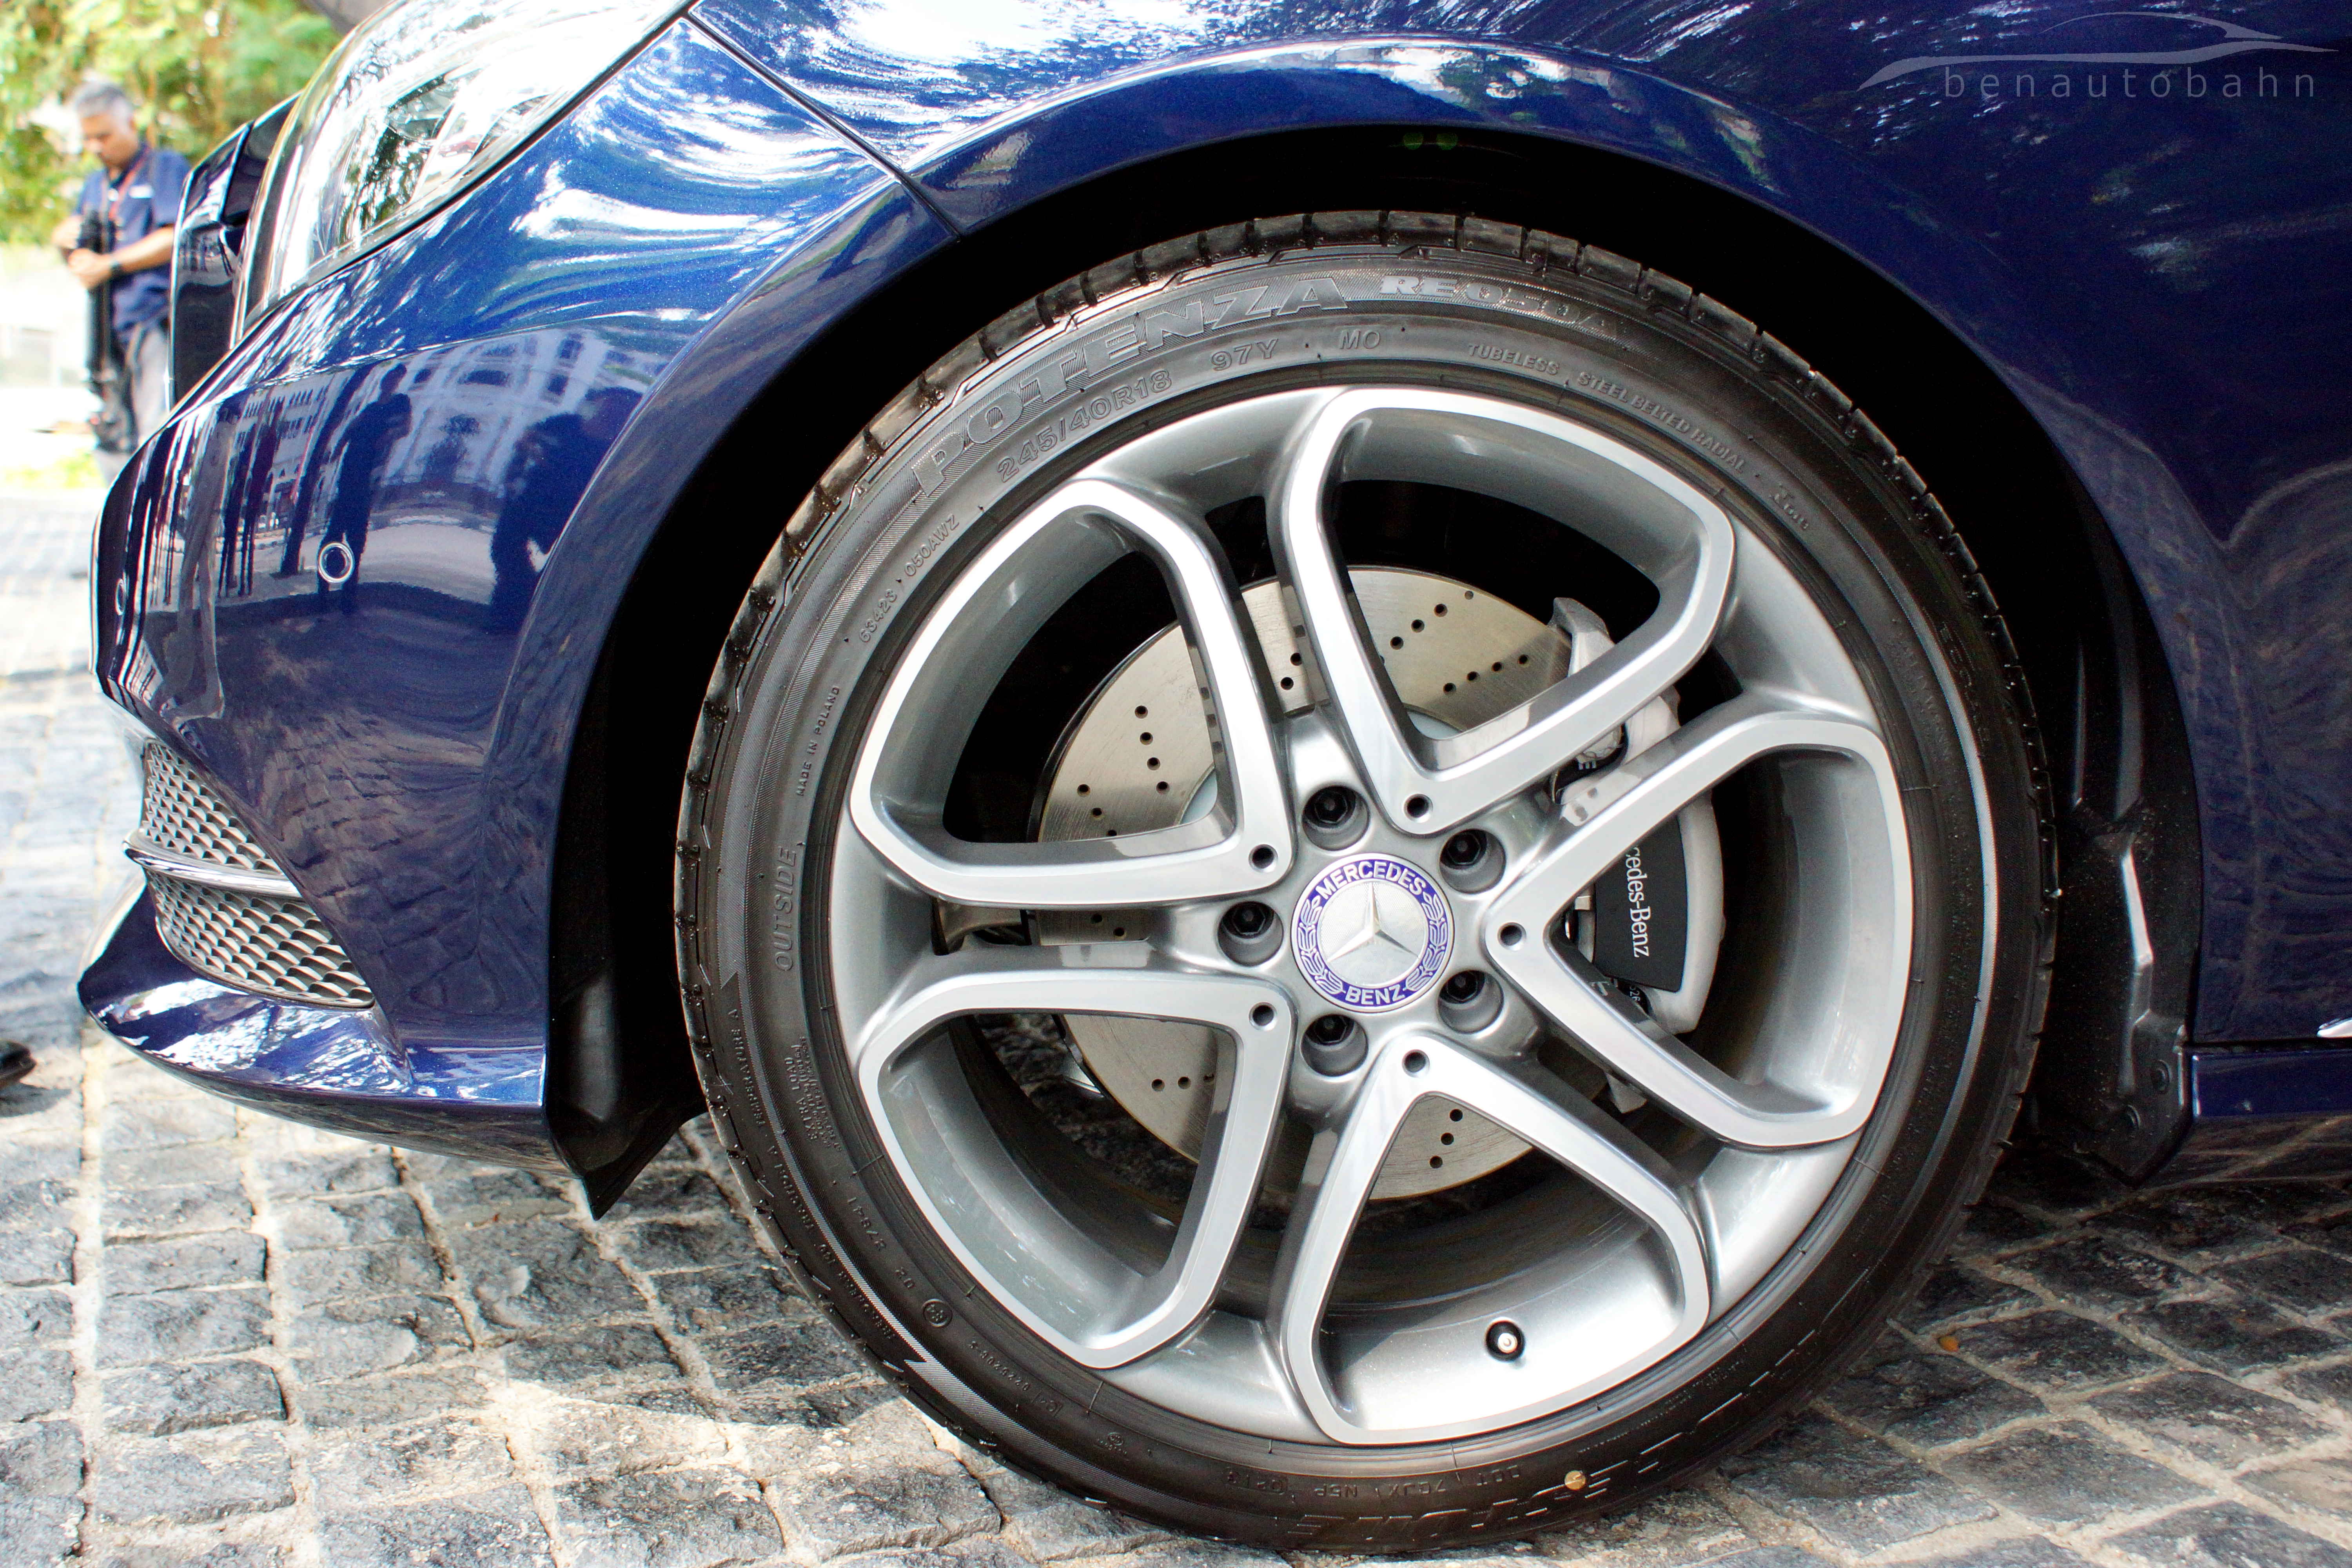 E250 gives you flashier rims and better brakes.